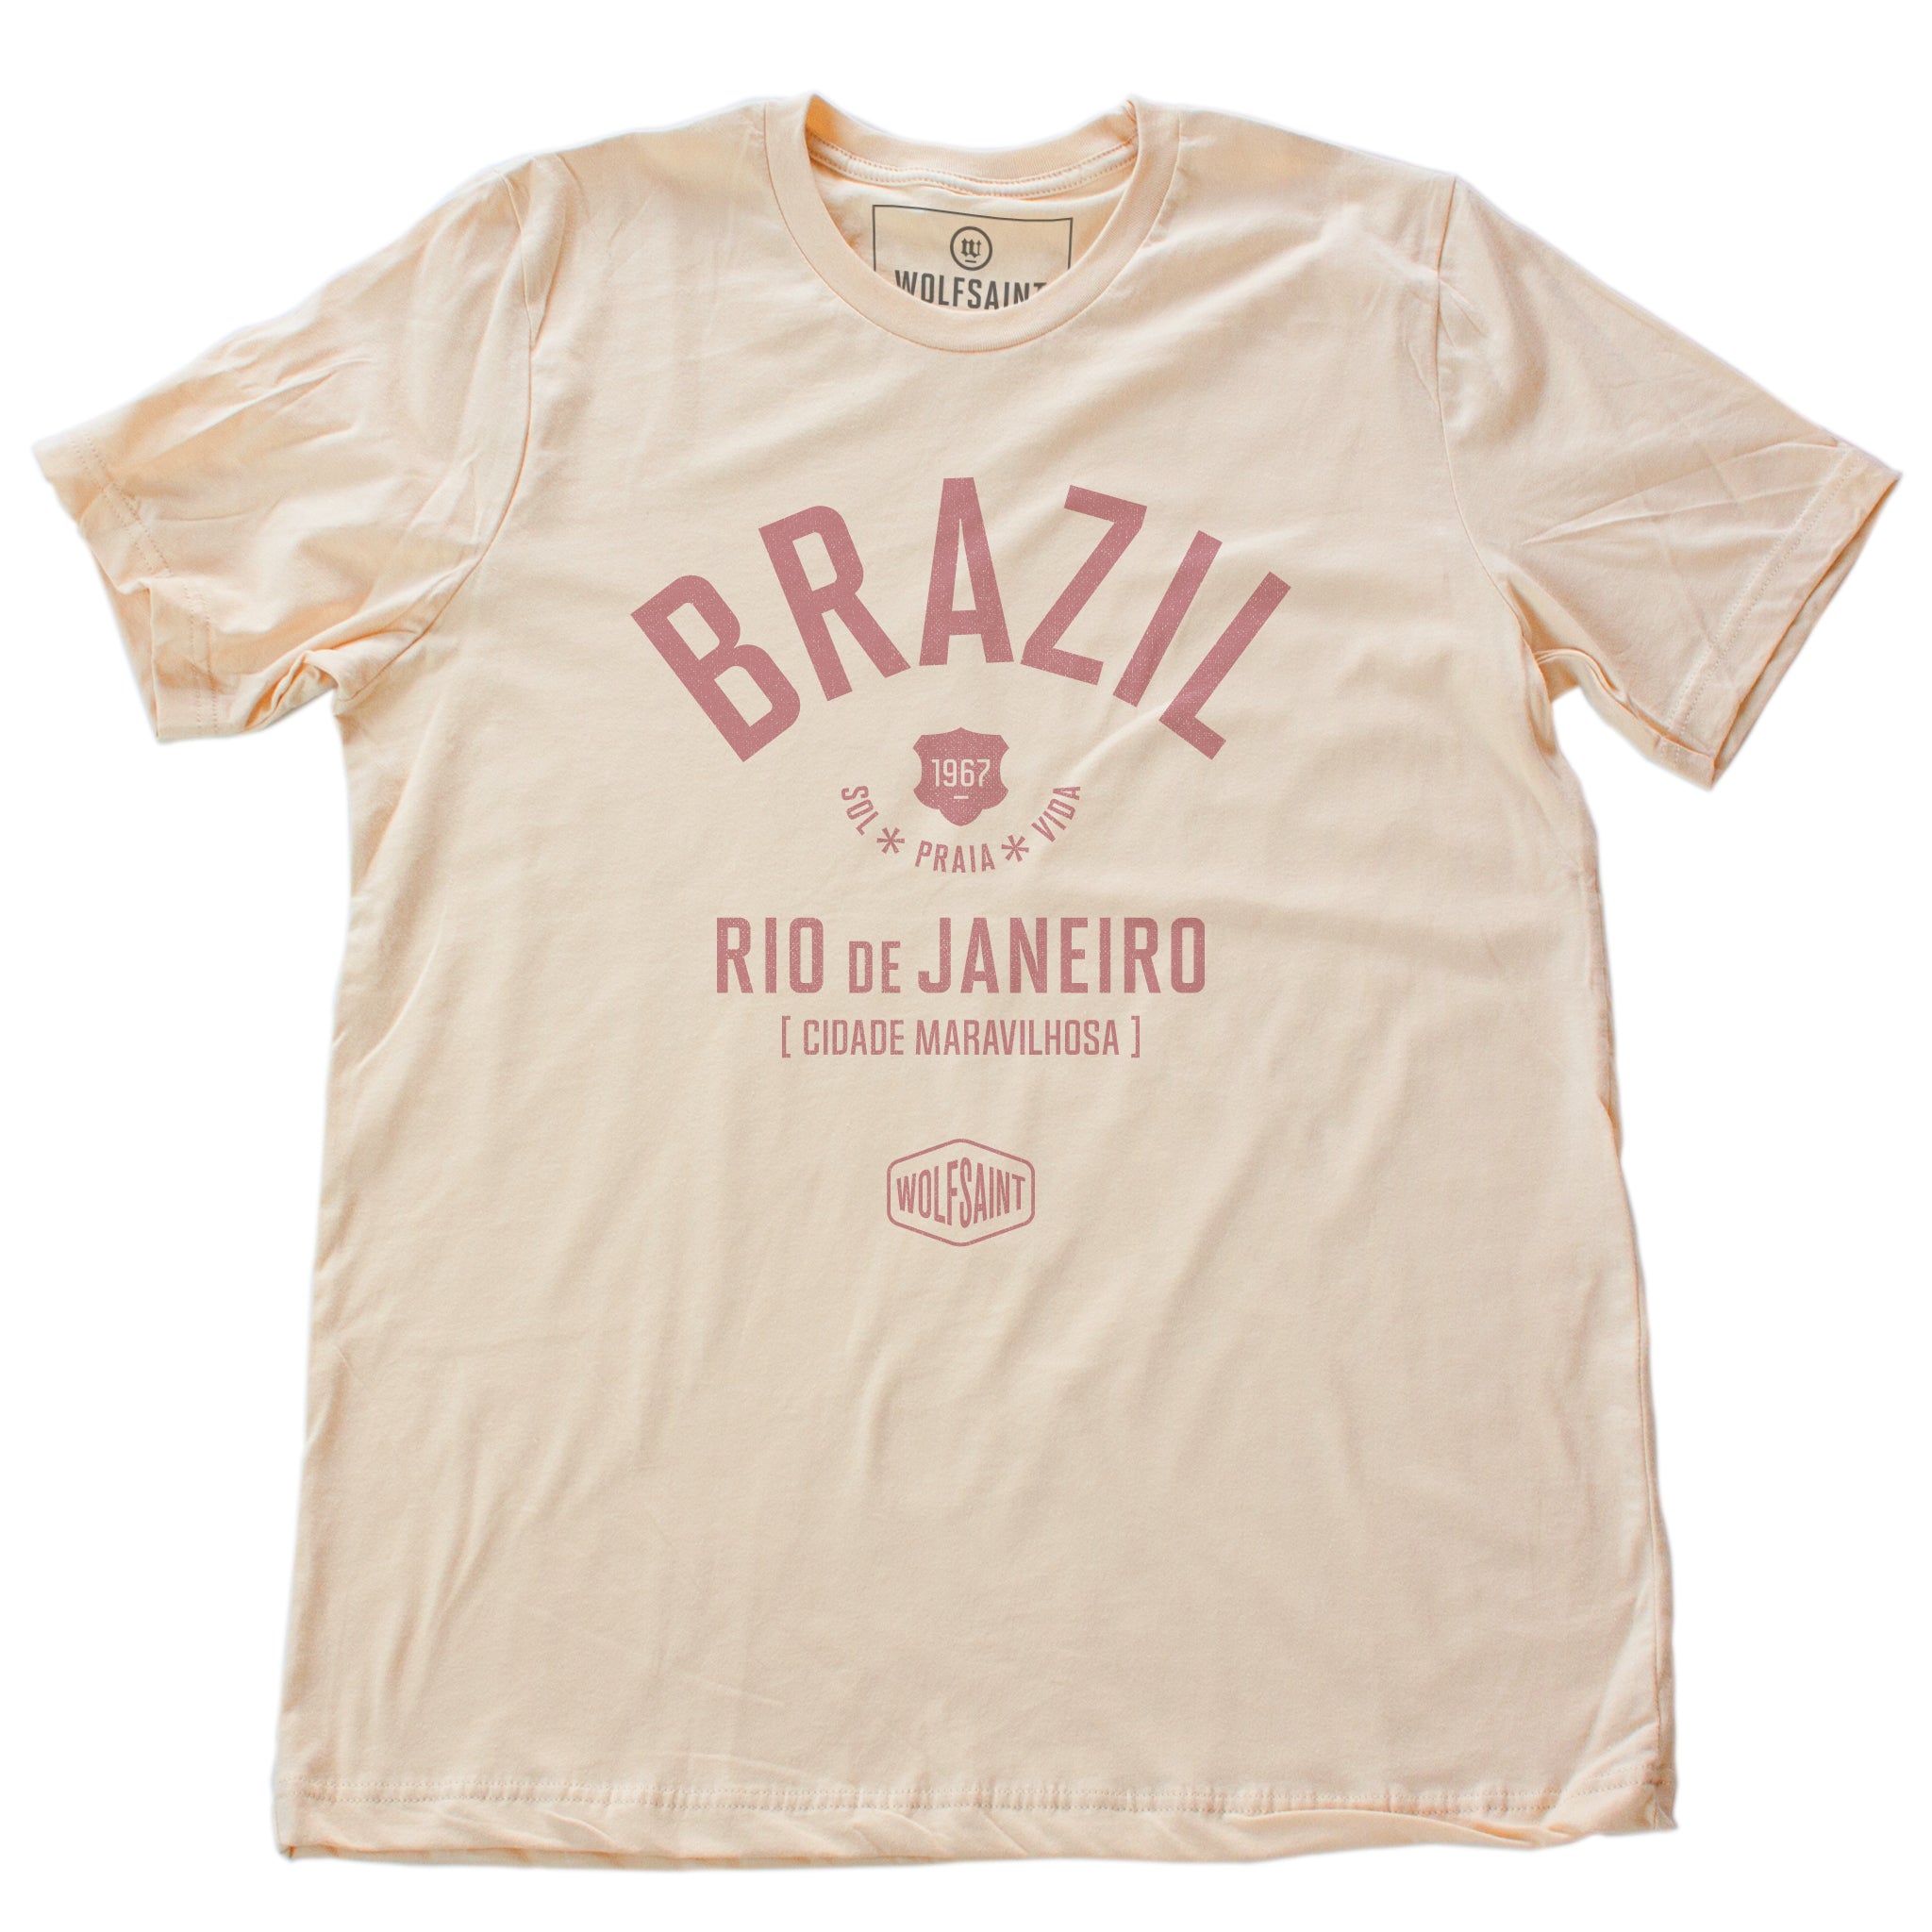 Soft Cream retro t-shirt with classic typography and graphic of BRAZIL (Brasil) and Rio de Janeiro, "Cidade Maravilhosa" (The Marvelous City) by brand Wolfsaint, with the date 1967, and sun, beach, life in Portuguese (Sol Praia Vida). From wolfsaint.net